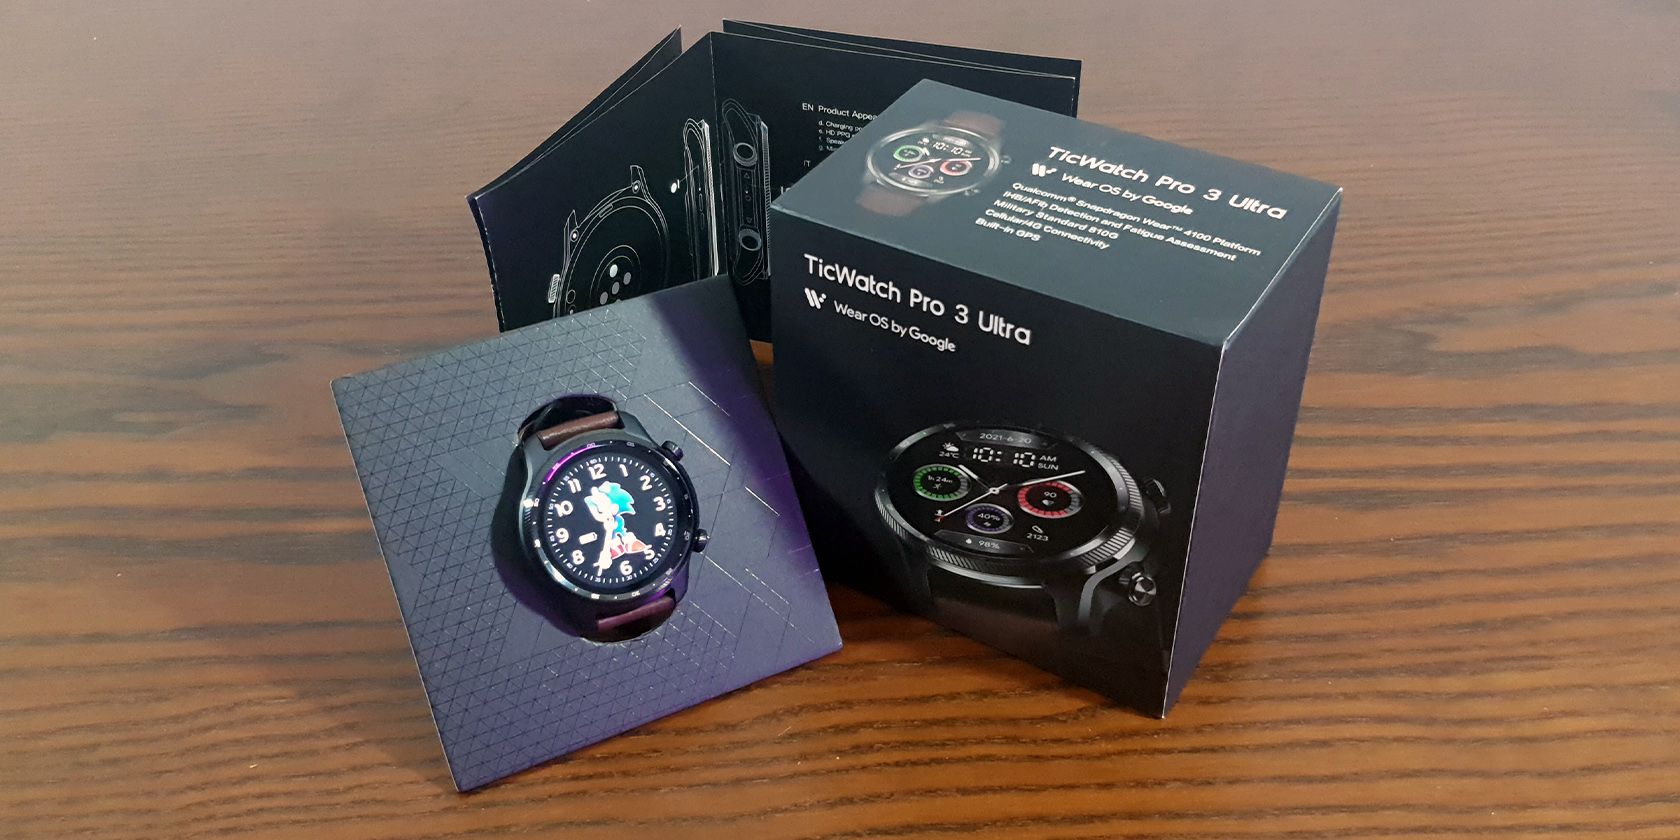 TicWatch Pro 3 Ultra GPS With Box and Manual on Wooden Surface